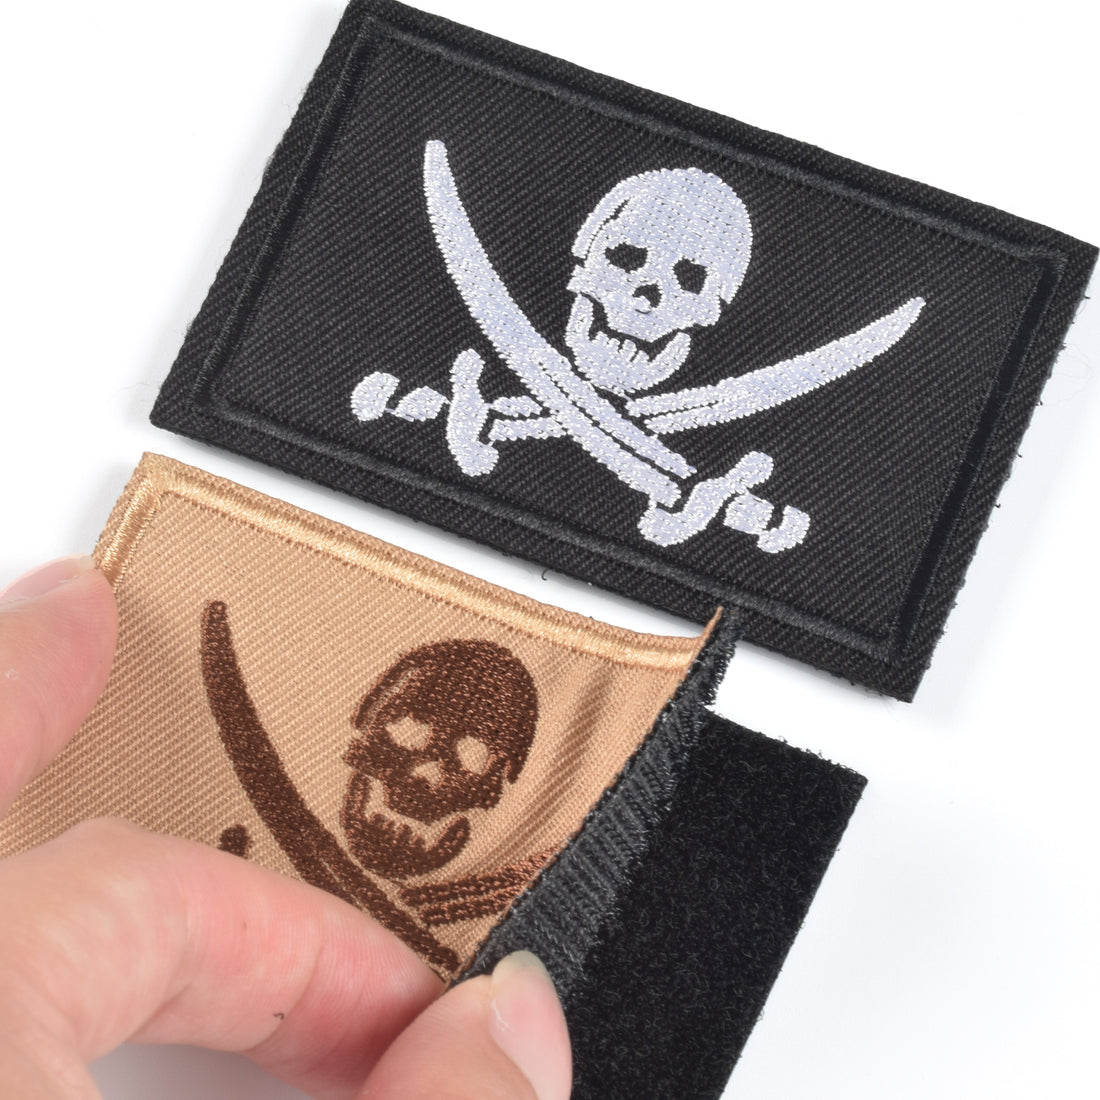 2 Pieces Pirate Skull & Cross Sword Flag Jolly Roger Tactical Morale Embroidery Patch Military for Tactical Gear